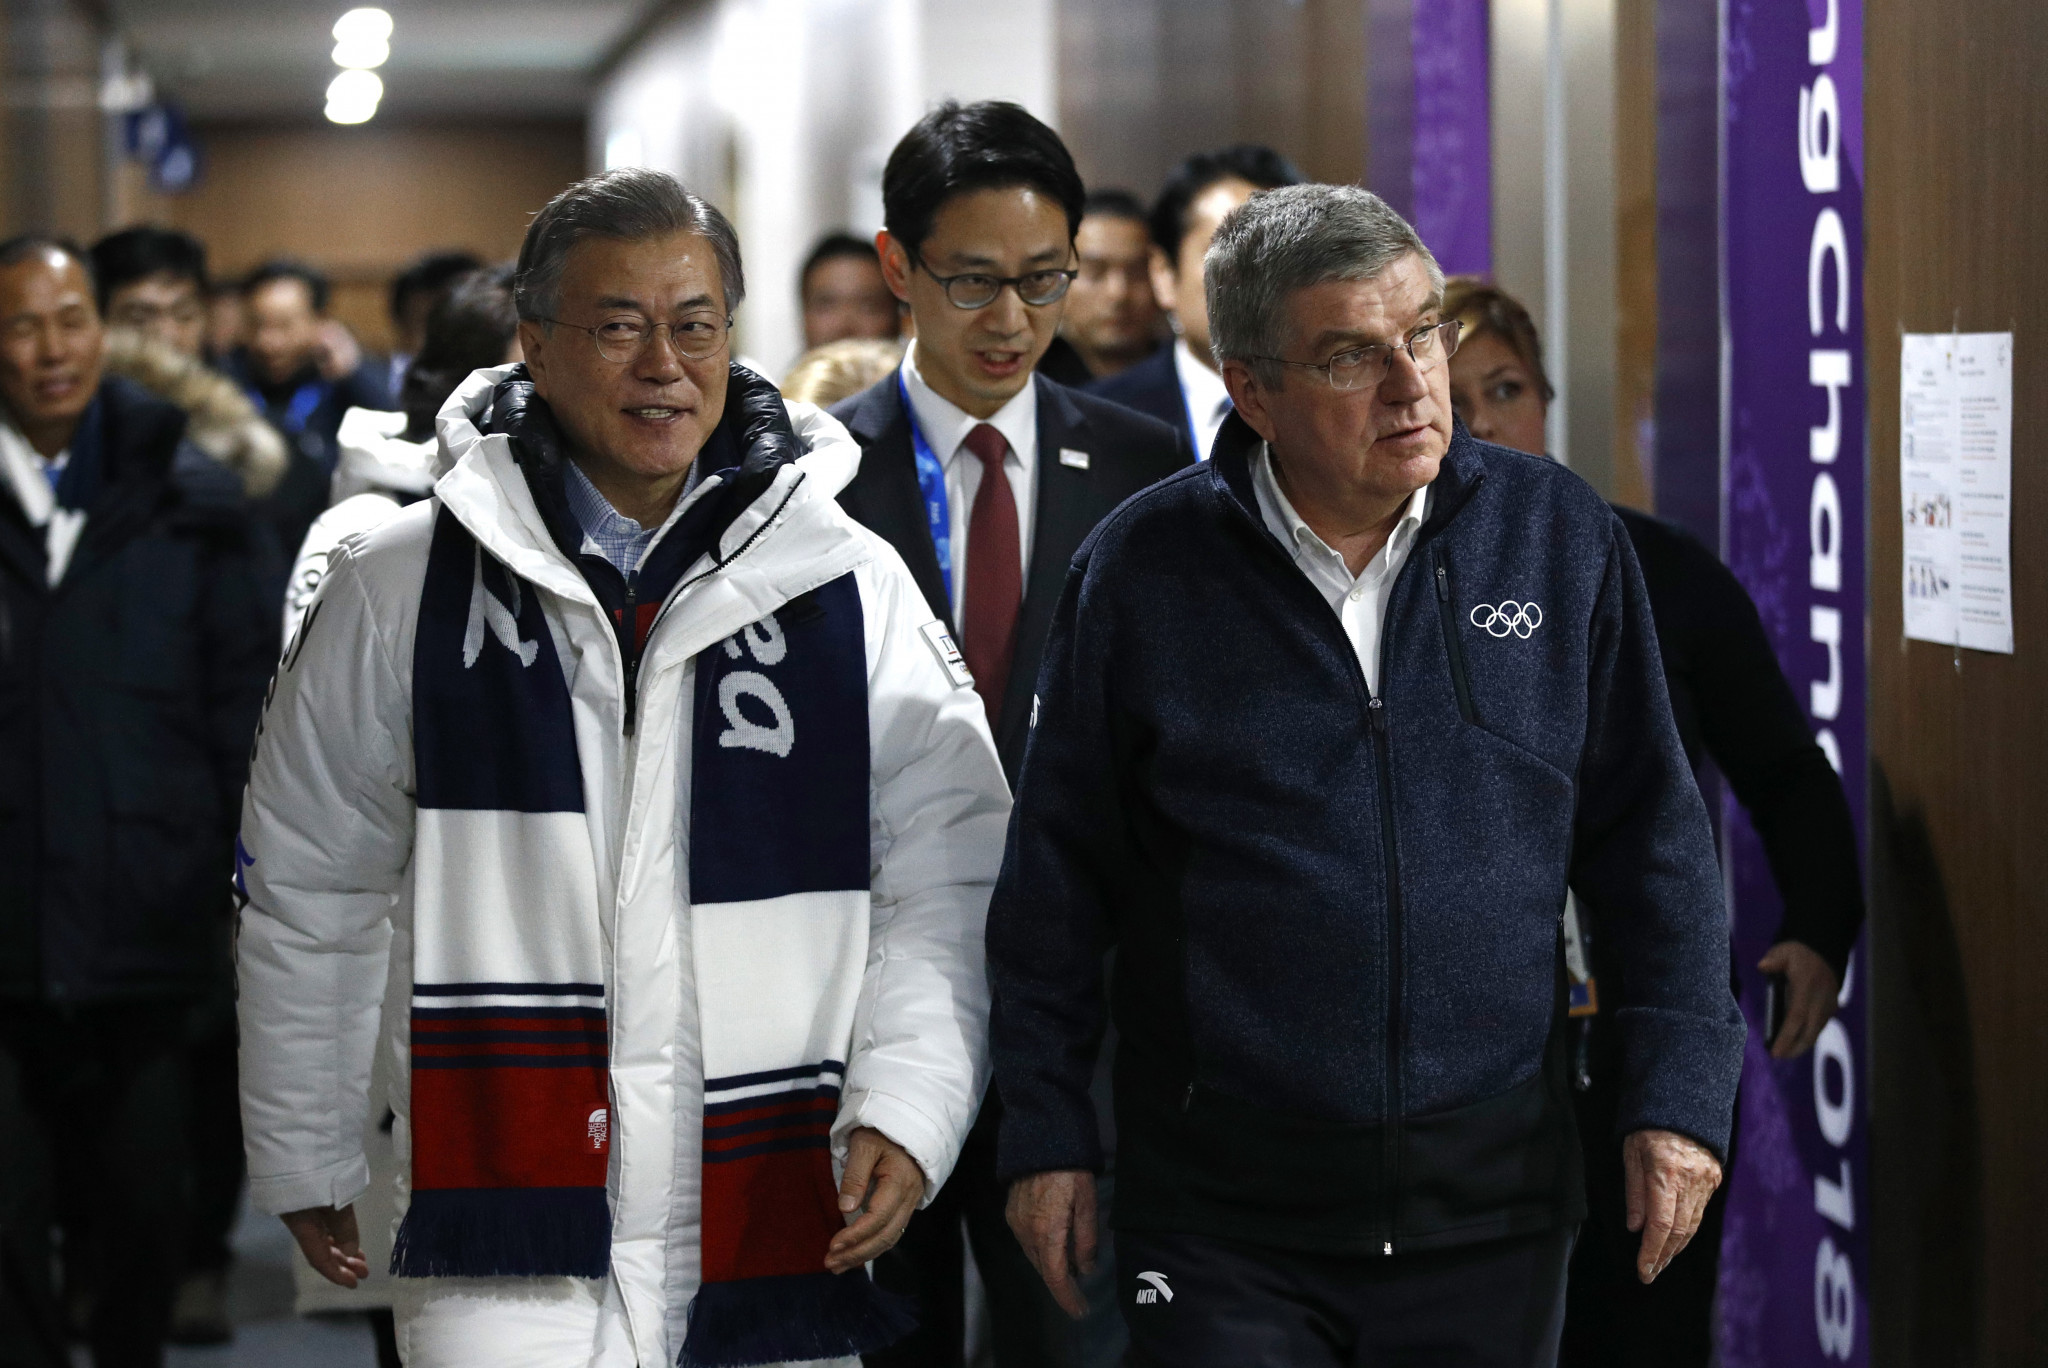 Moon Jae-in joined Thomas Bach in attending the Pyeongchang 2018 Closing Ceremony ©Getty Images